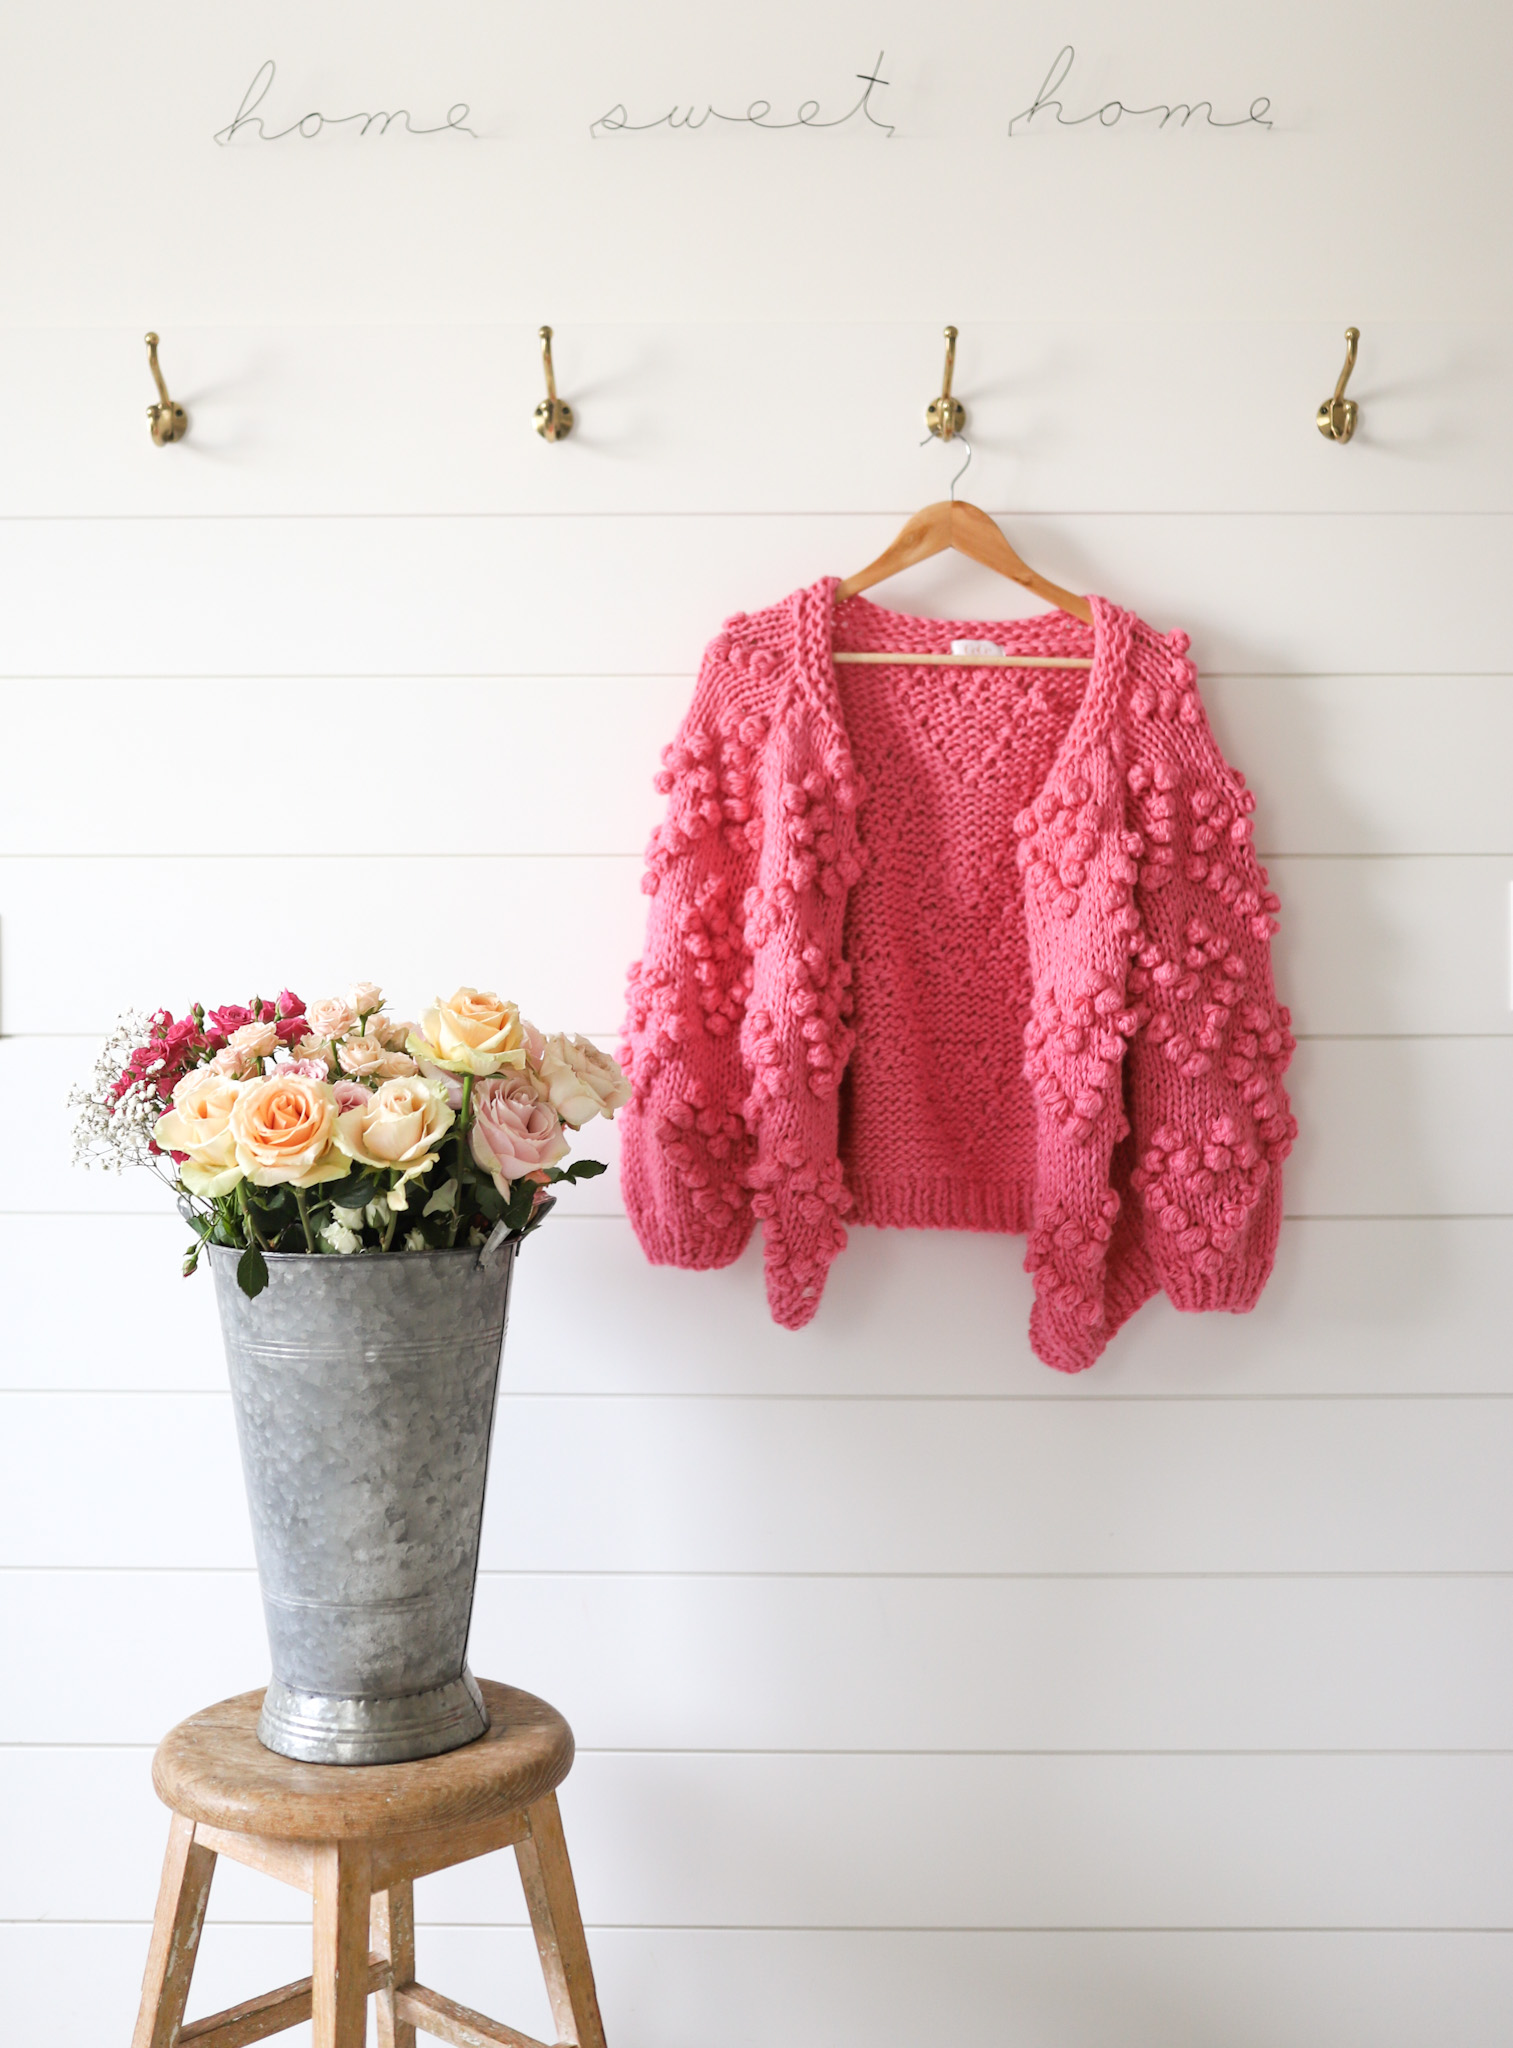 pink sweater hanging beside a bouquet of flowers